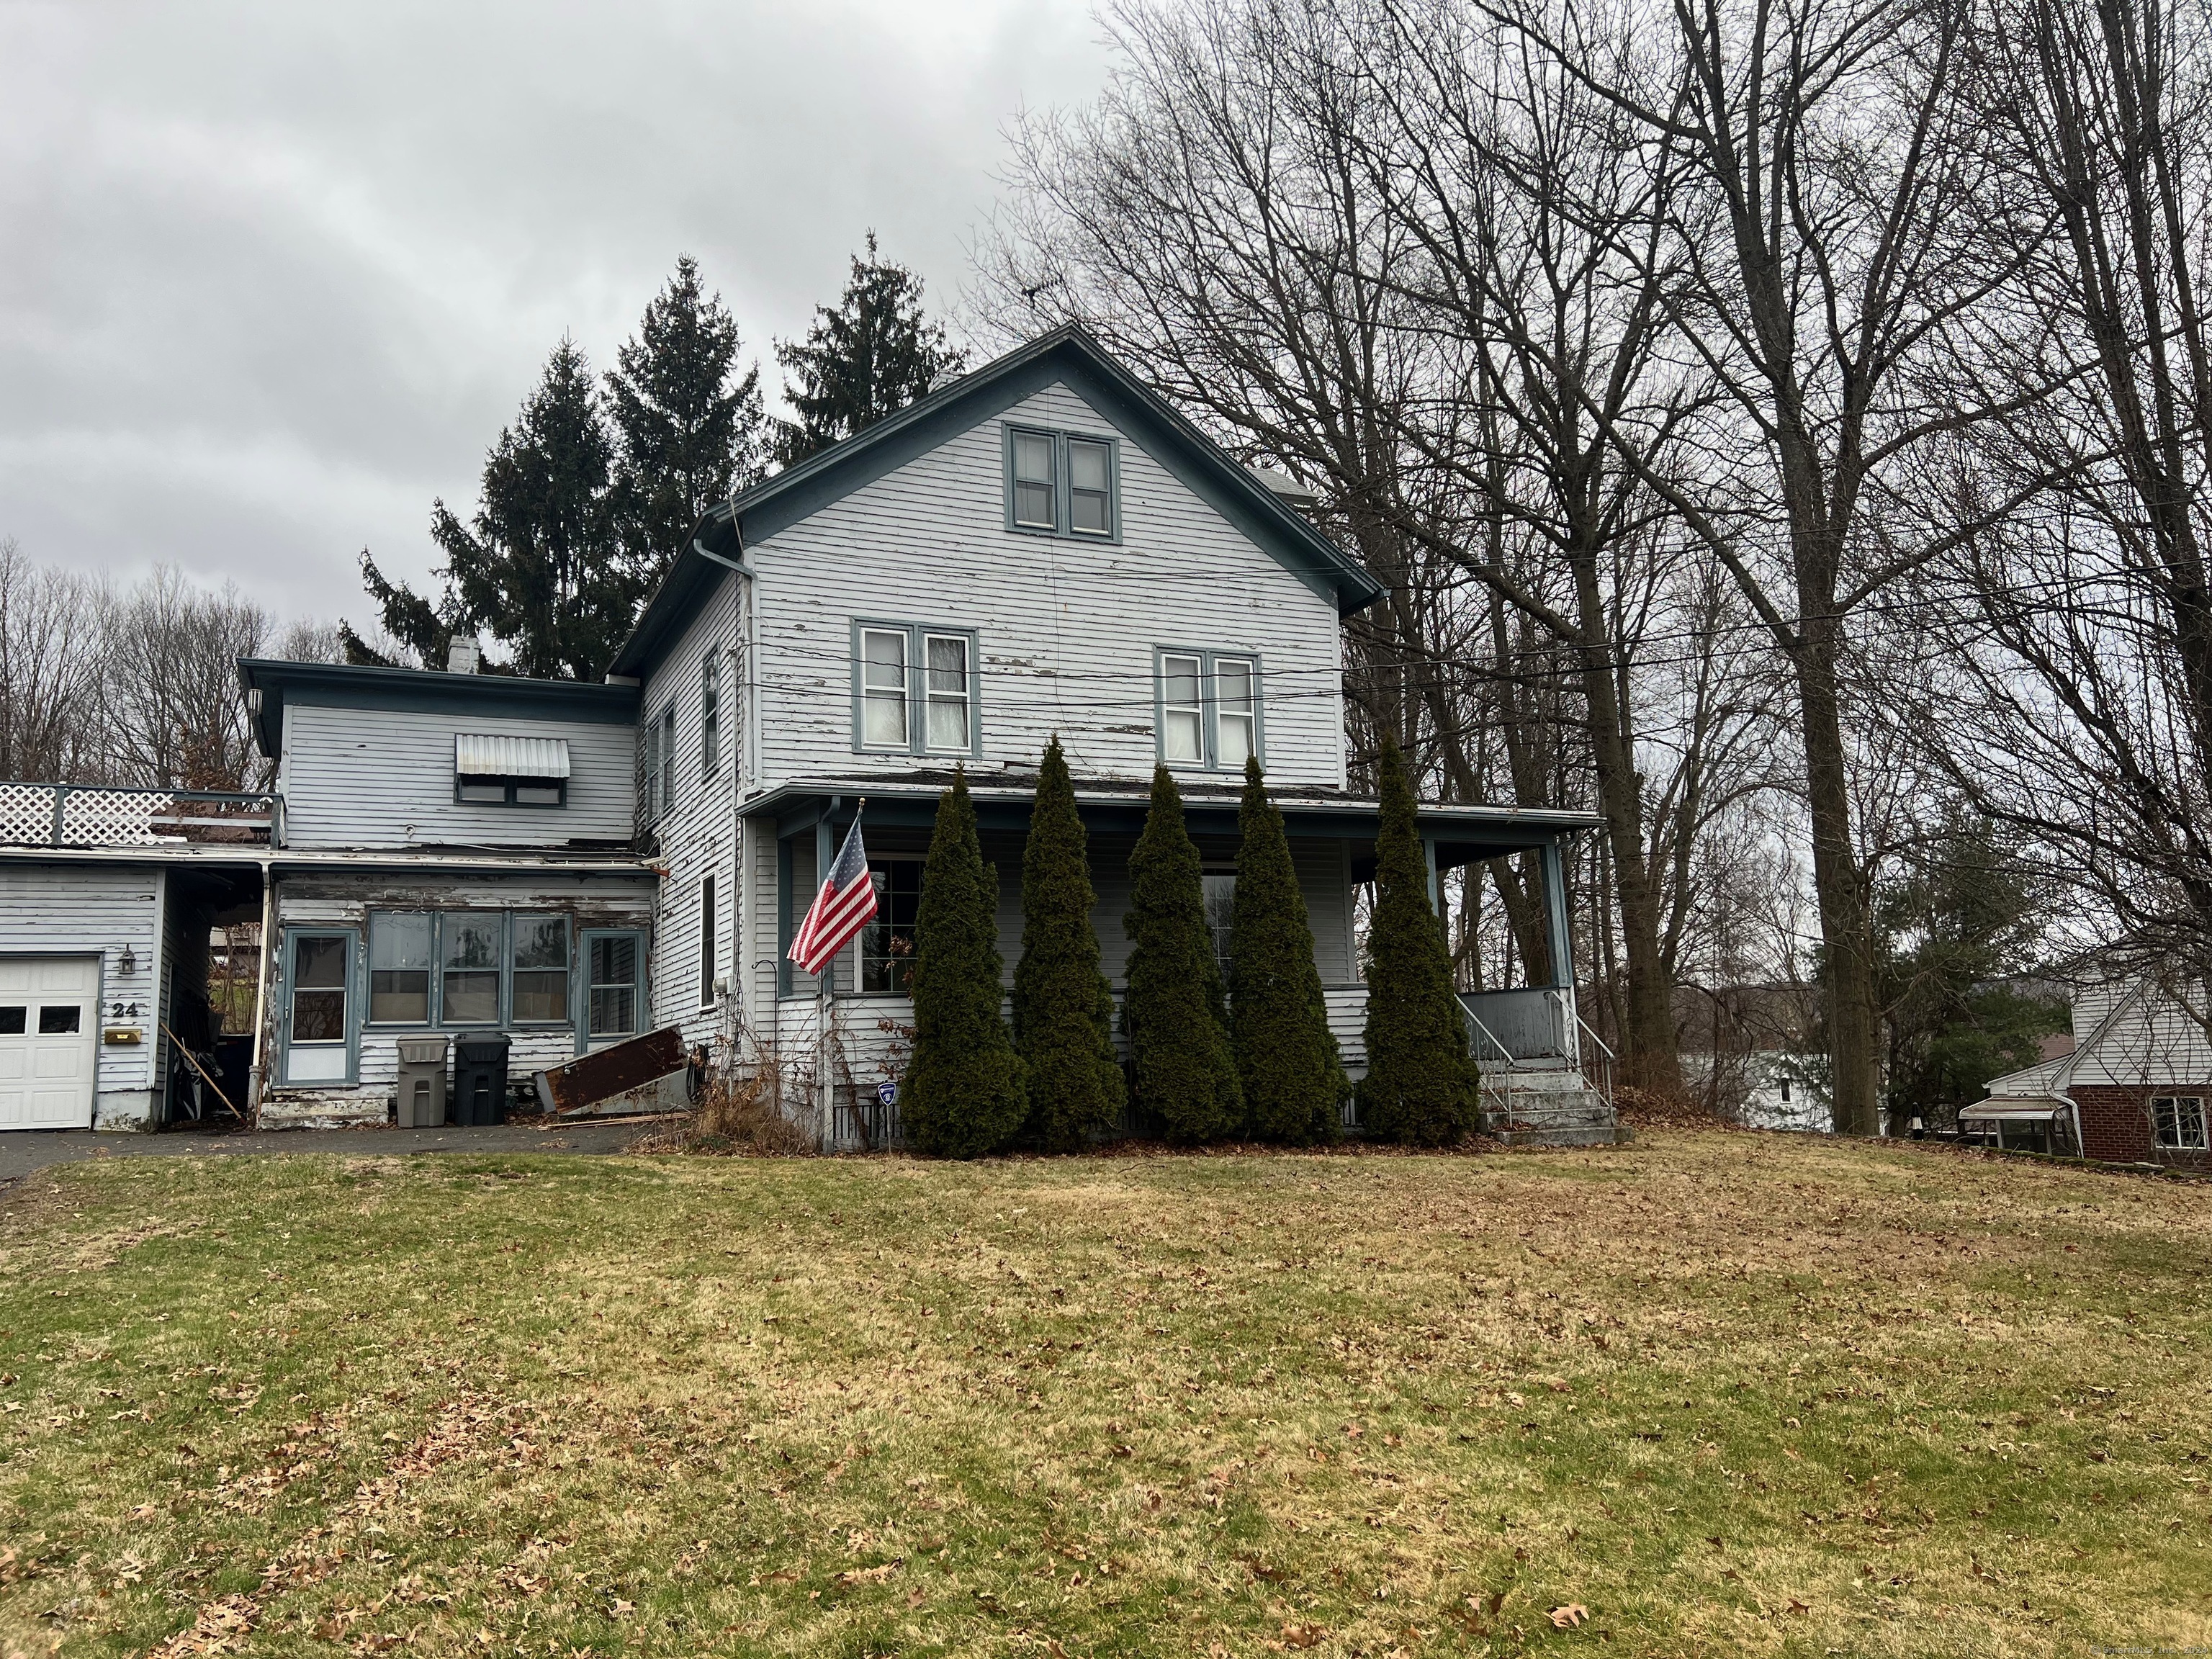 Great Large 2 car garage property in nice area of Bristol CT. House will need some work but is priced to accommodate and ready for a quick flip!